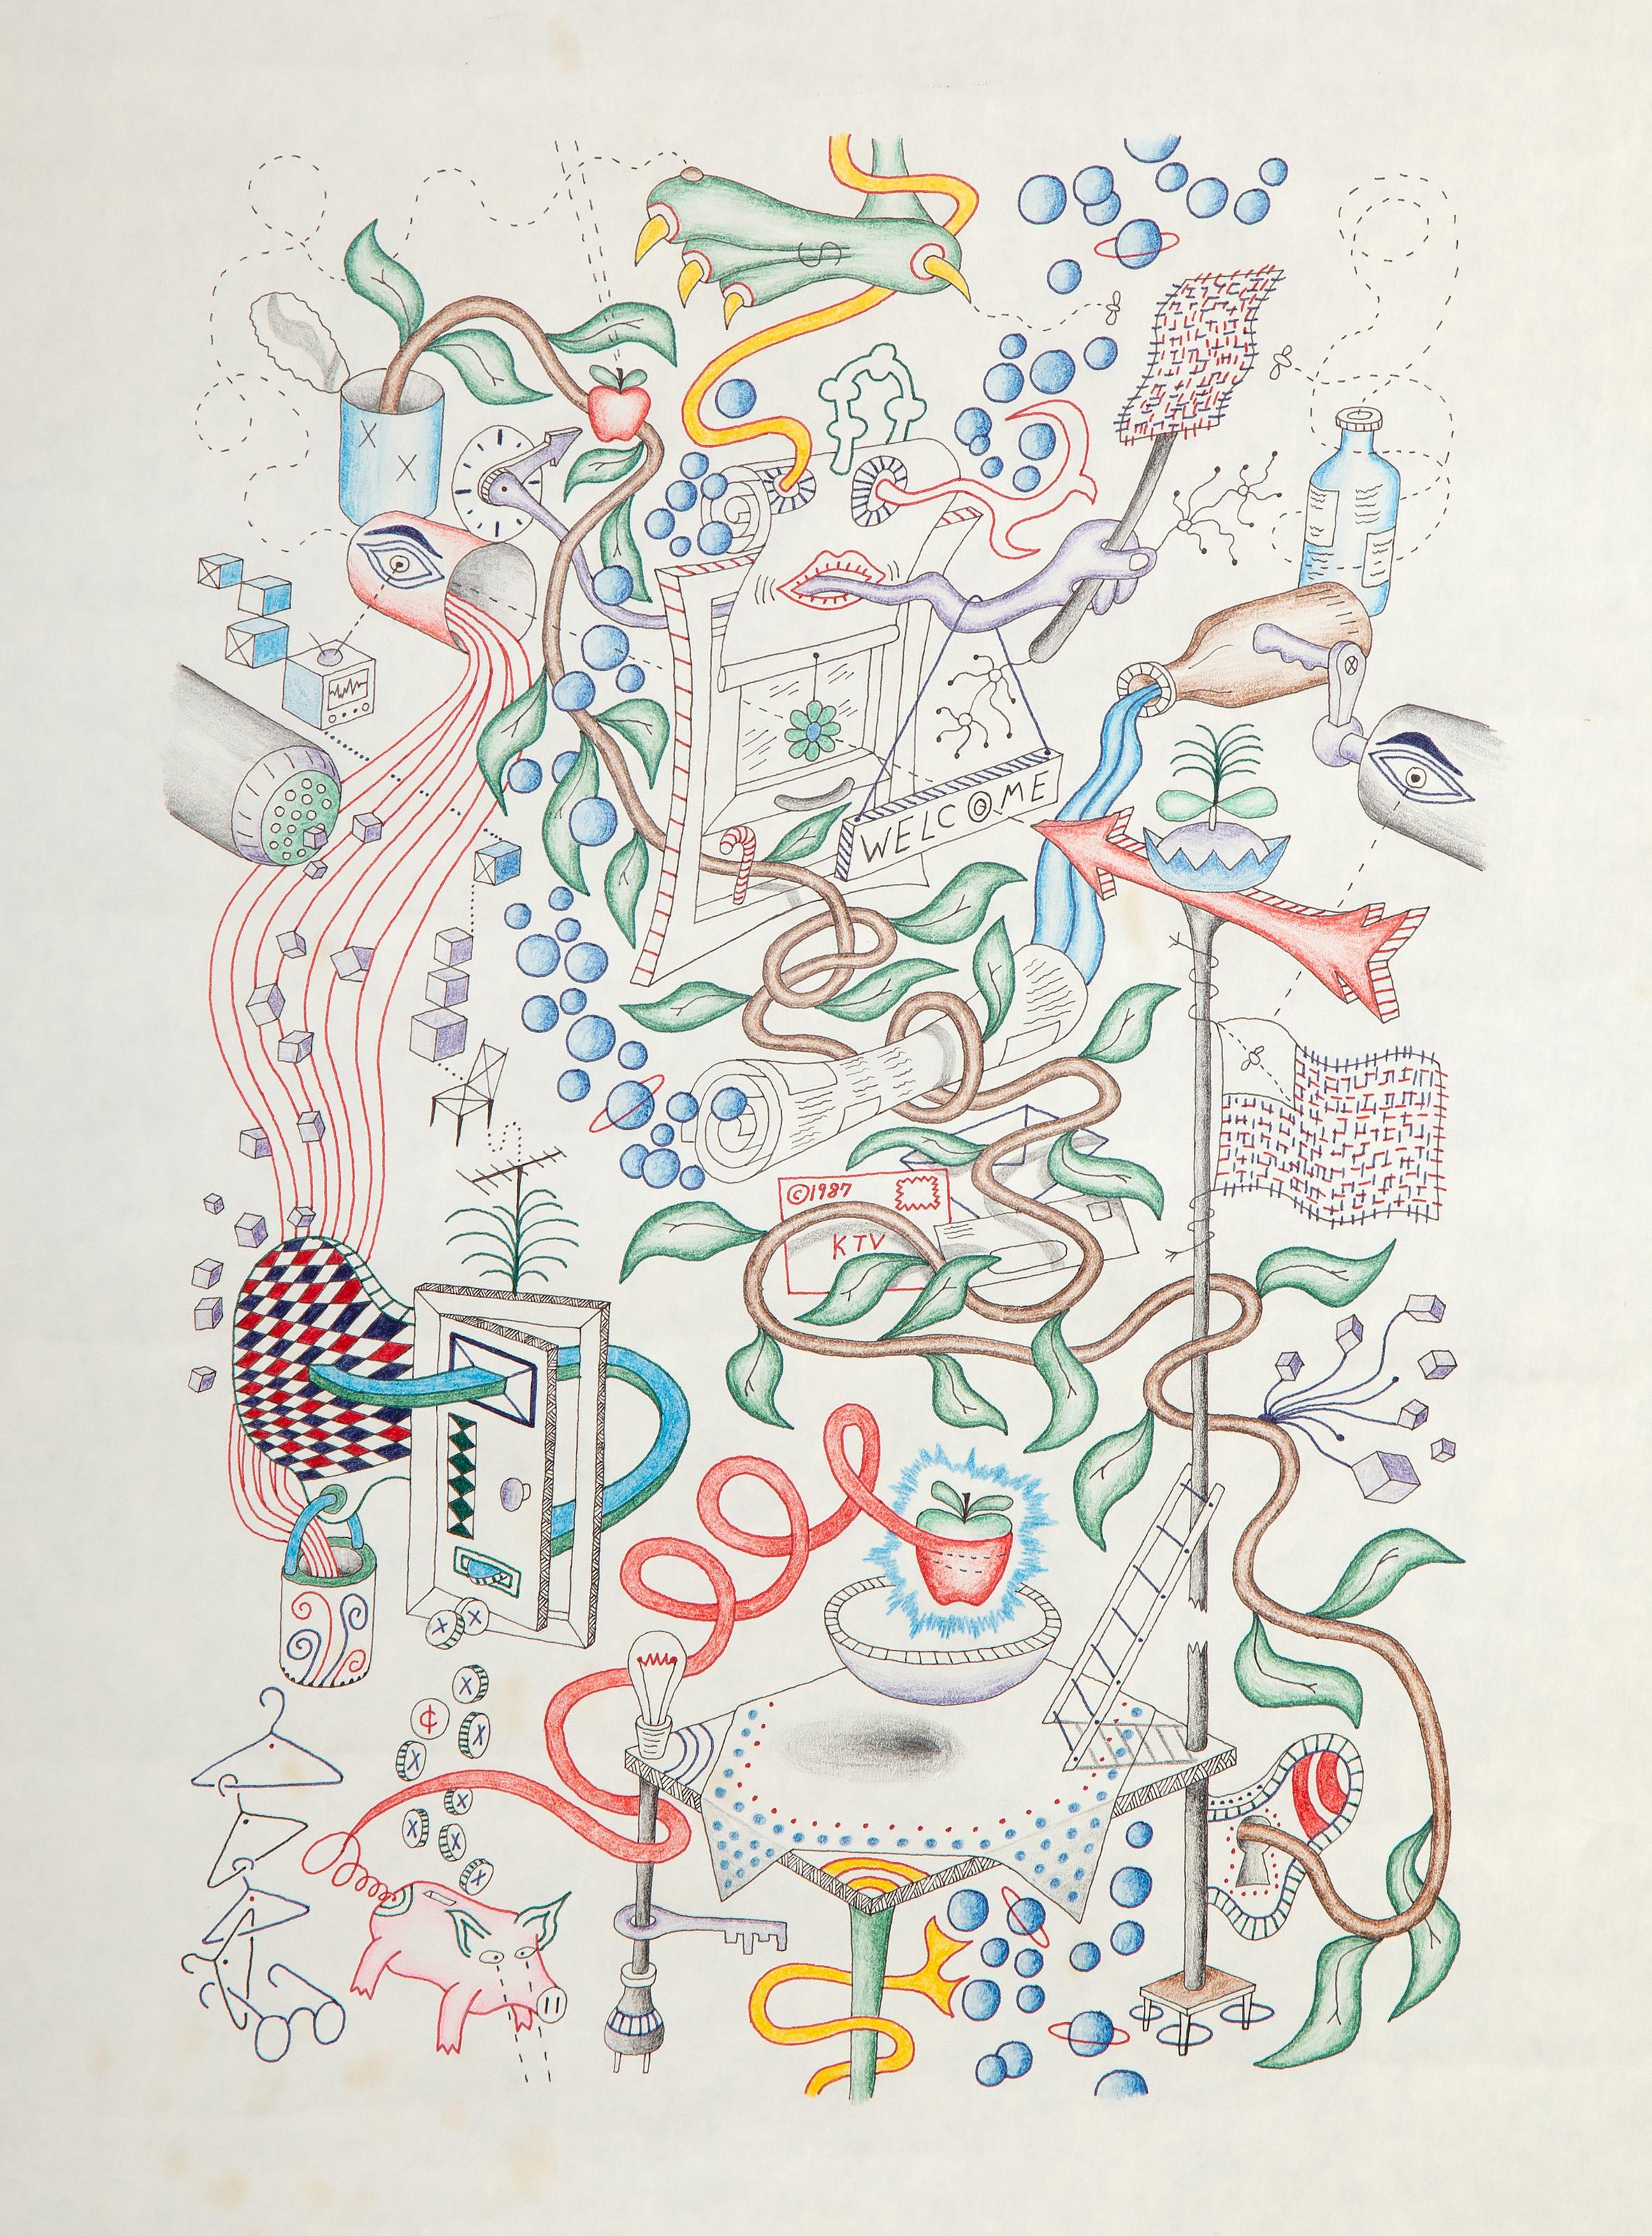 Kevin Varner, American (1954 - 2019) -  Recycled Foot is Brought to You by The Committee to Save Animal Fat. Year: 1987, Medium: Color Pencil and Ink on Paper, signed and dated, titled on verso, Image Size: 10.5 x 21 inches, Size: 18 x 23.75 in.